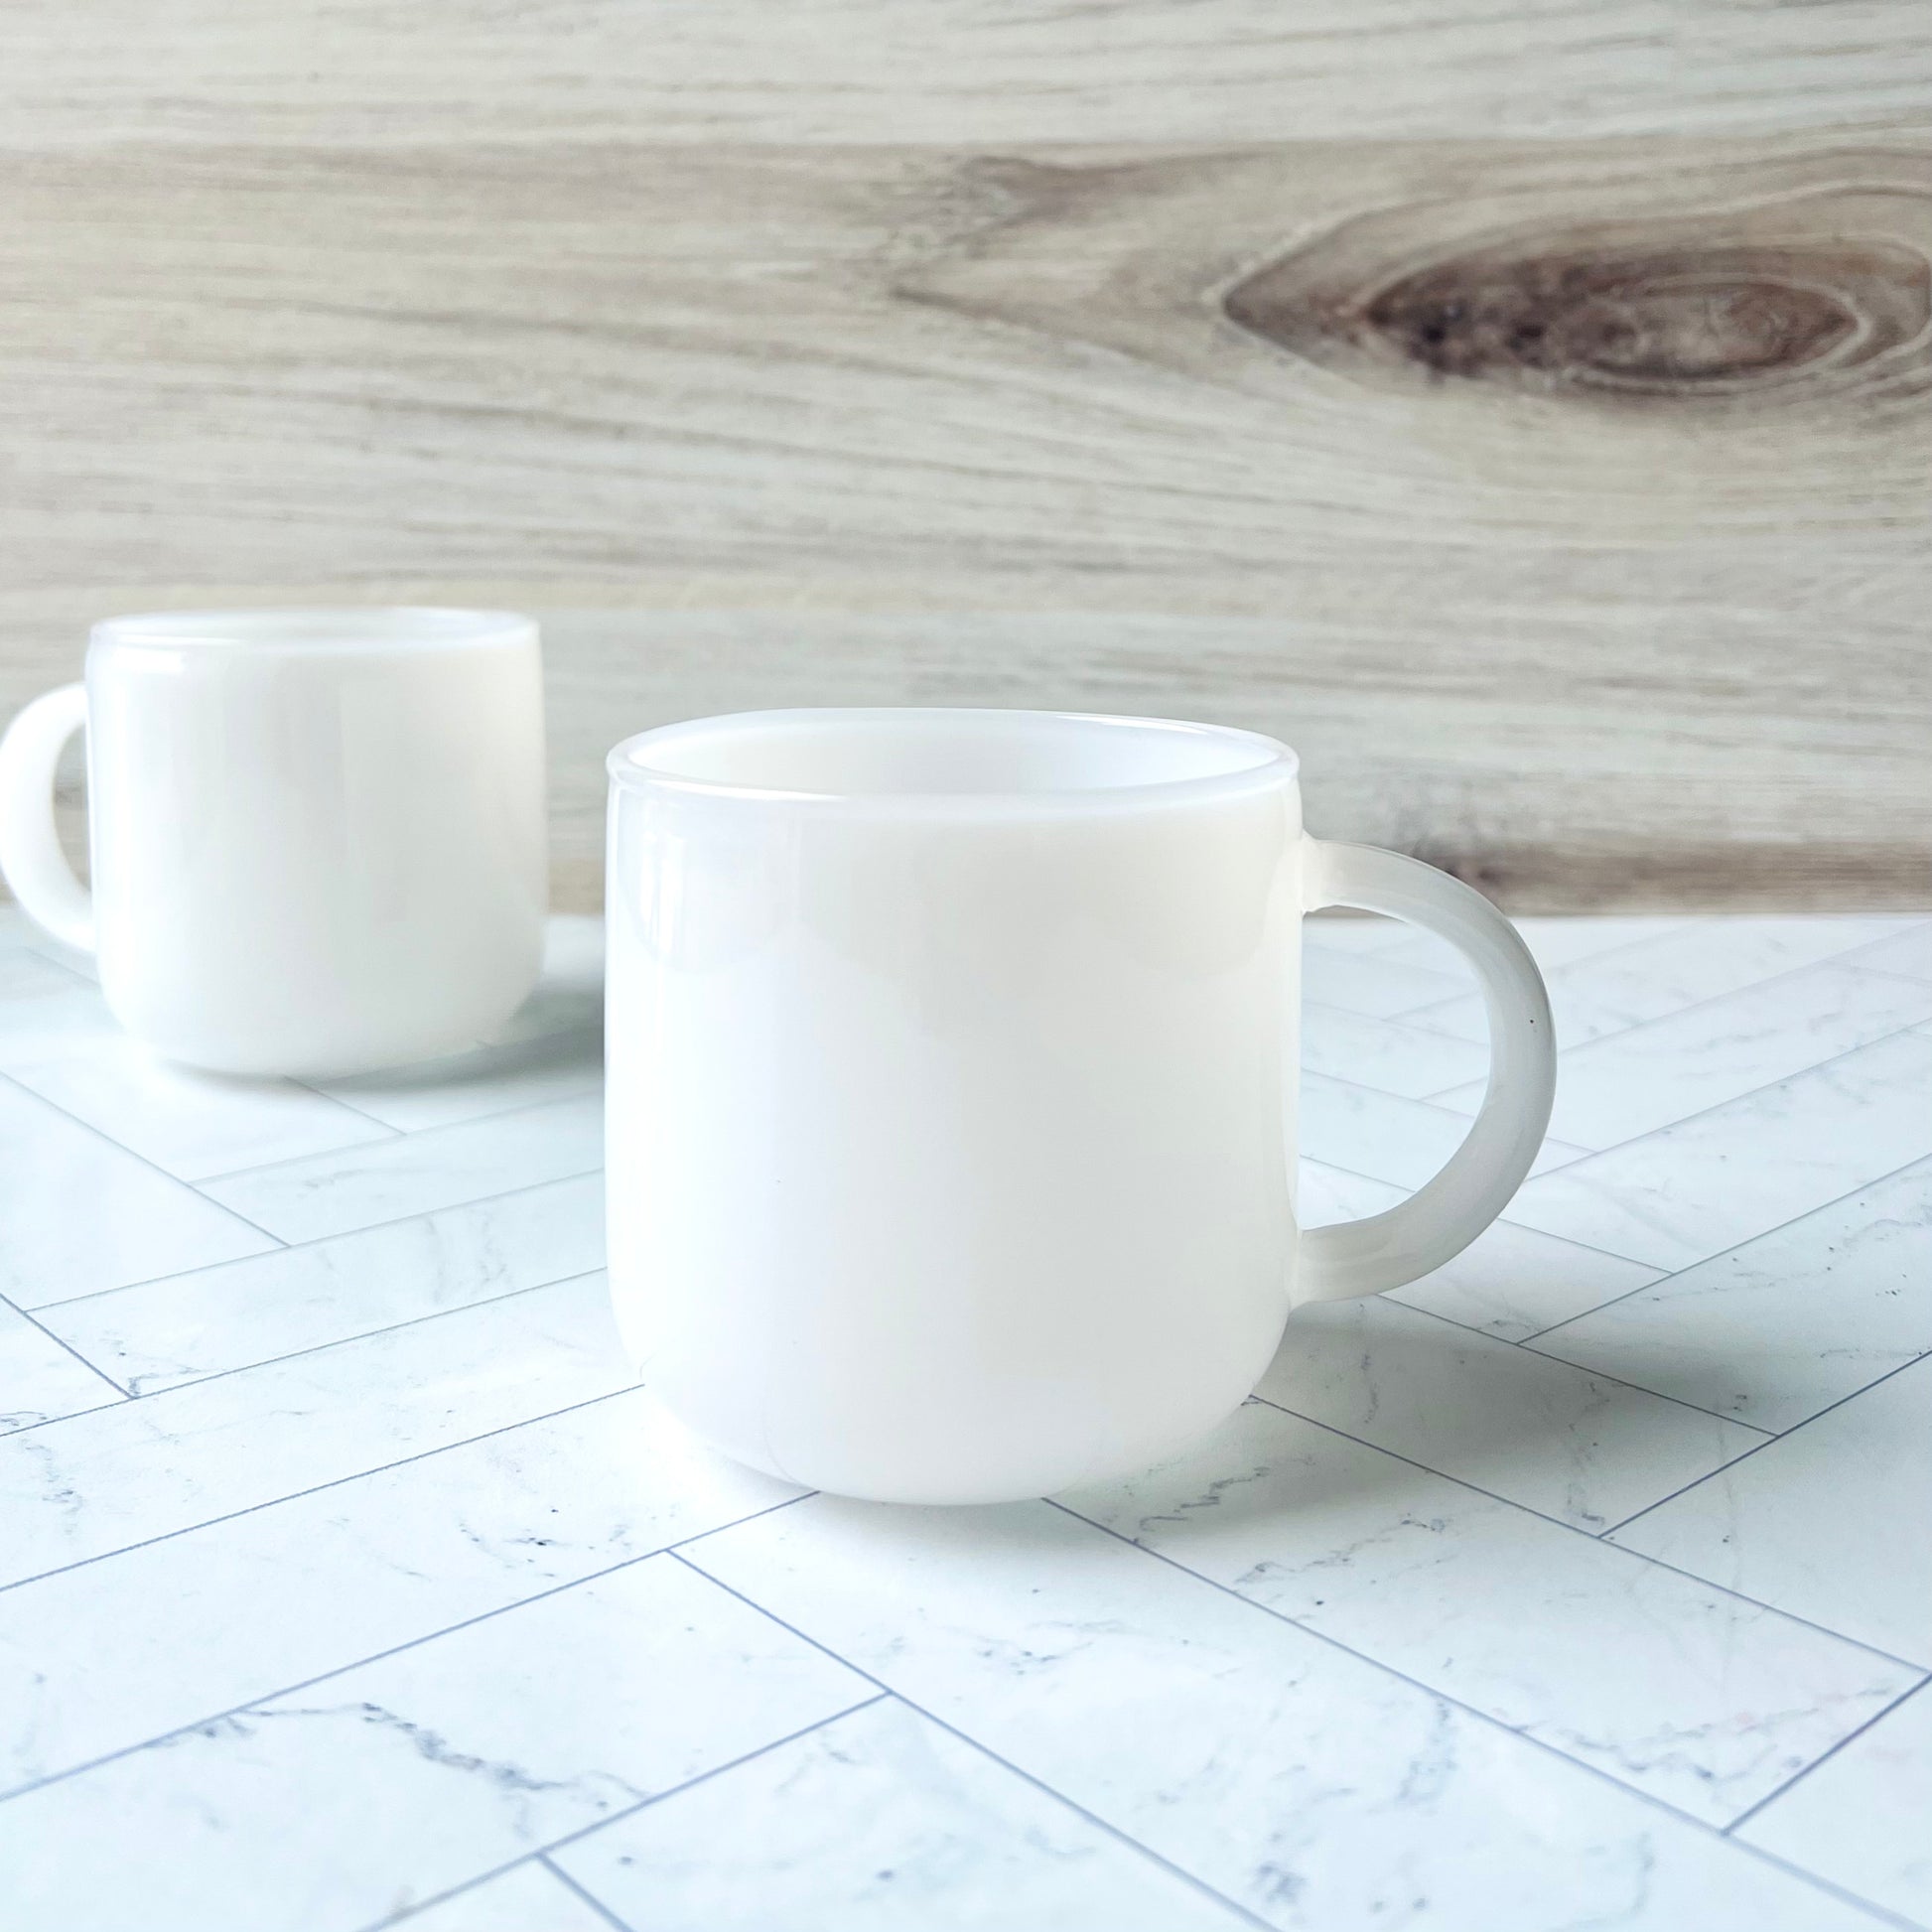 The Glass Mug Set in White shown with one front-and-center and the other in the background